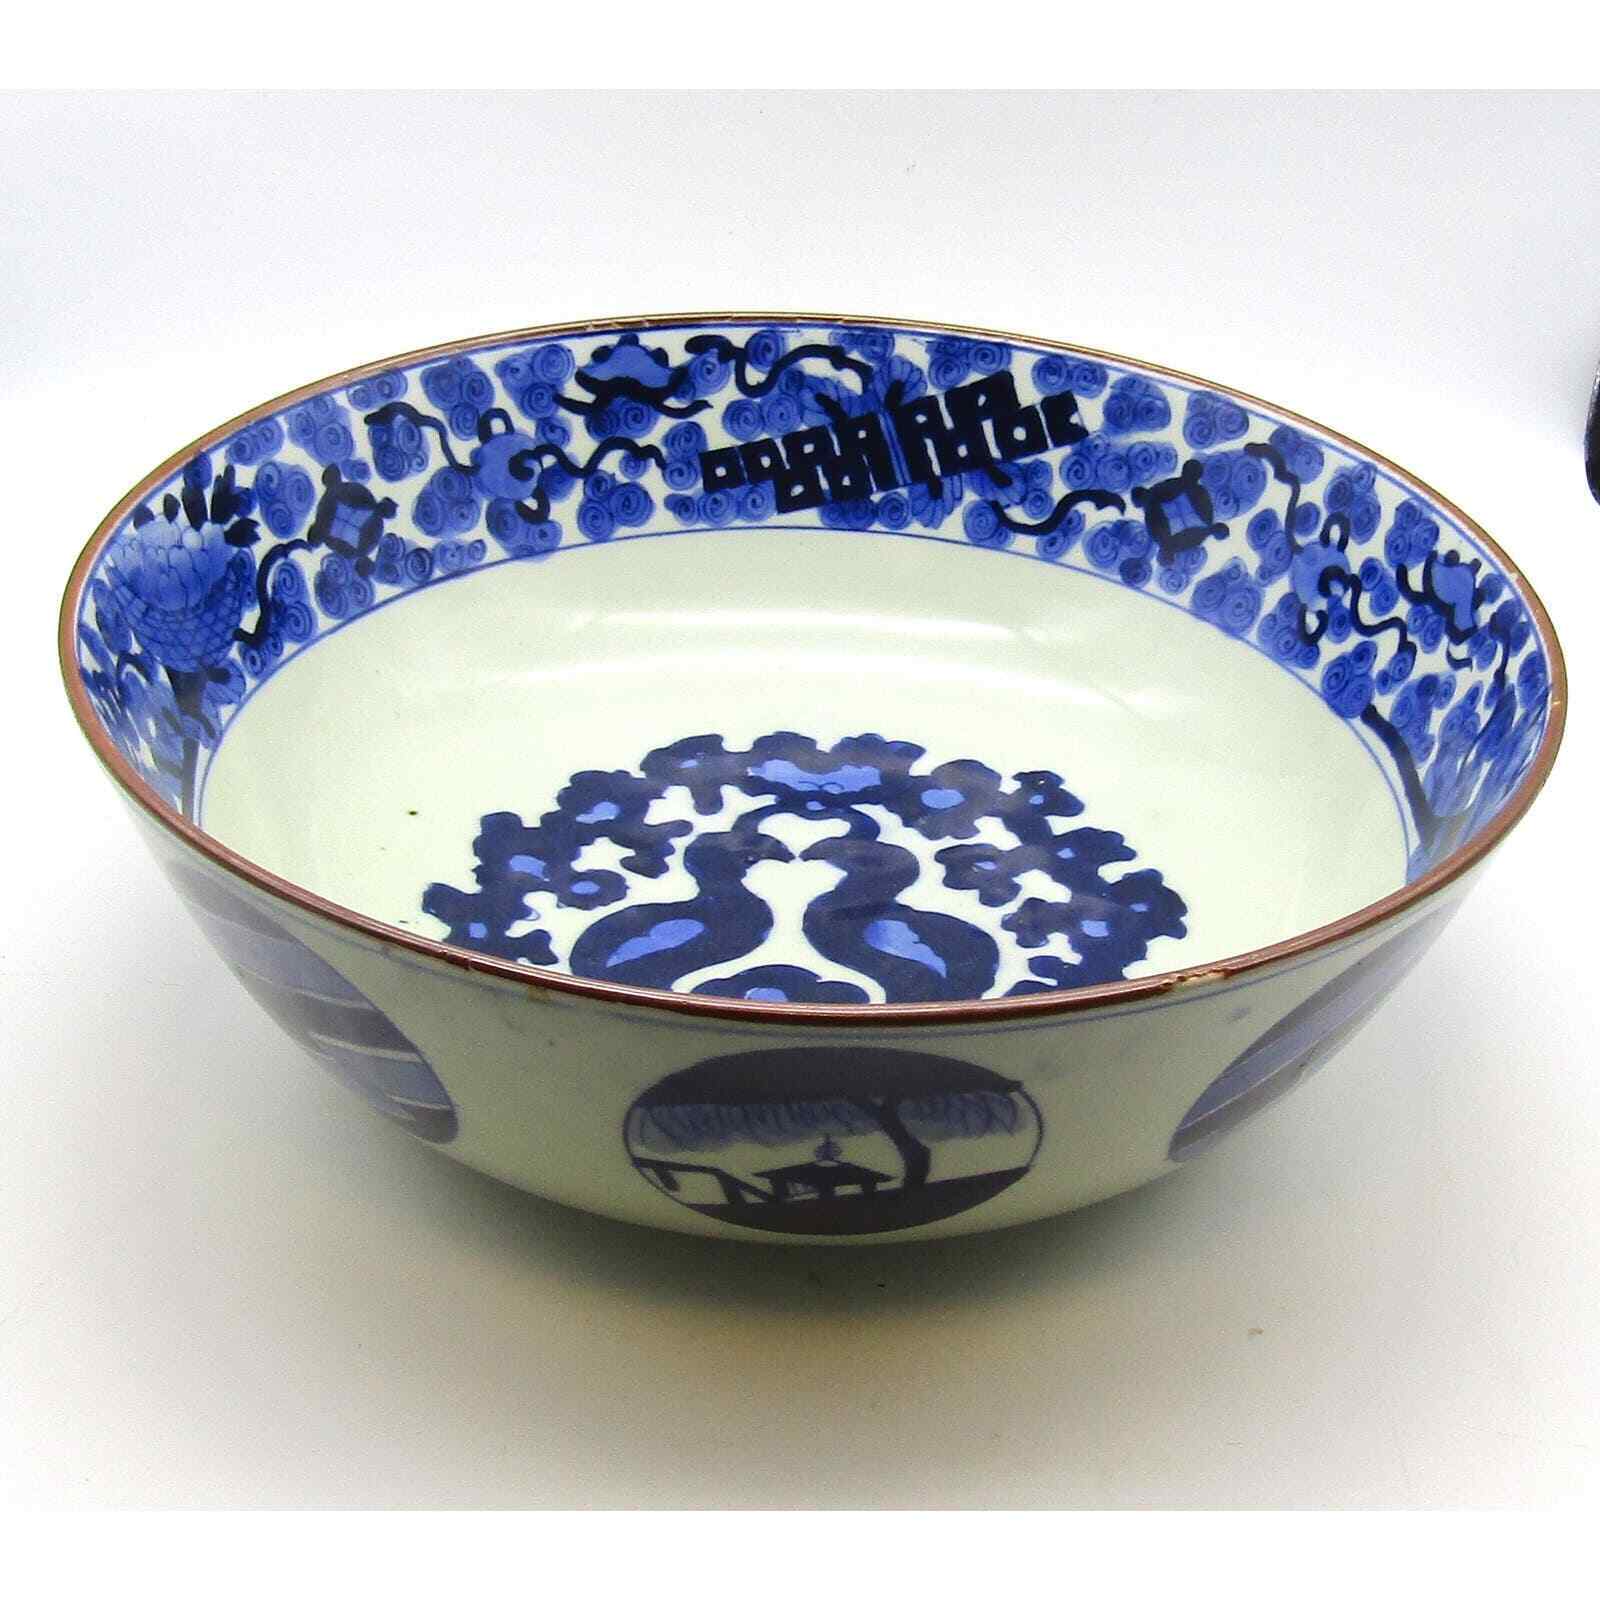 Chinese Bowl Antique Blue and White Flowers Birds Geometric 